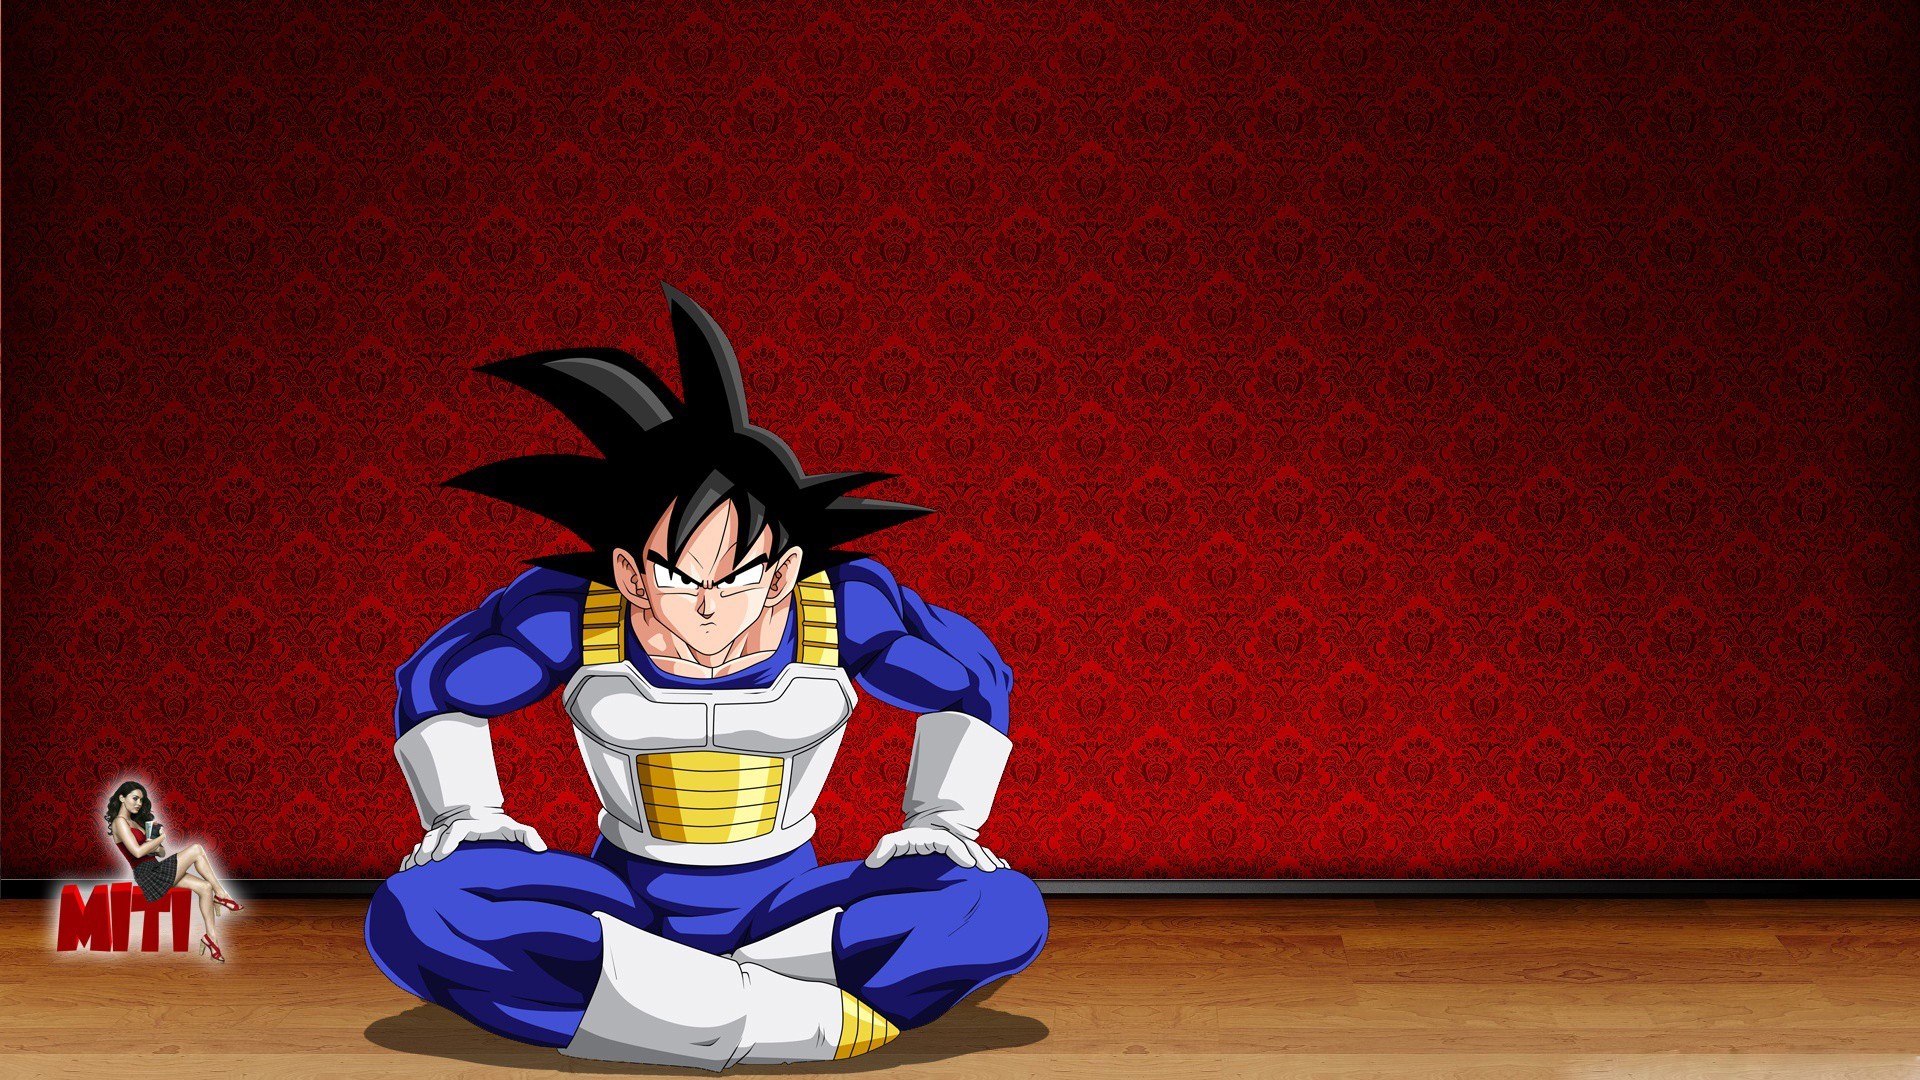 Wallpapers Goku Imagenes with resolution 1920X1080 pixel. You can use this wallpaper as background for your desktop Computer Screensavers, Android or iPhone smartphones